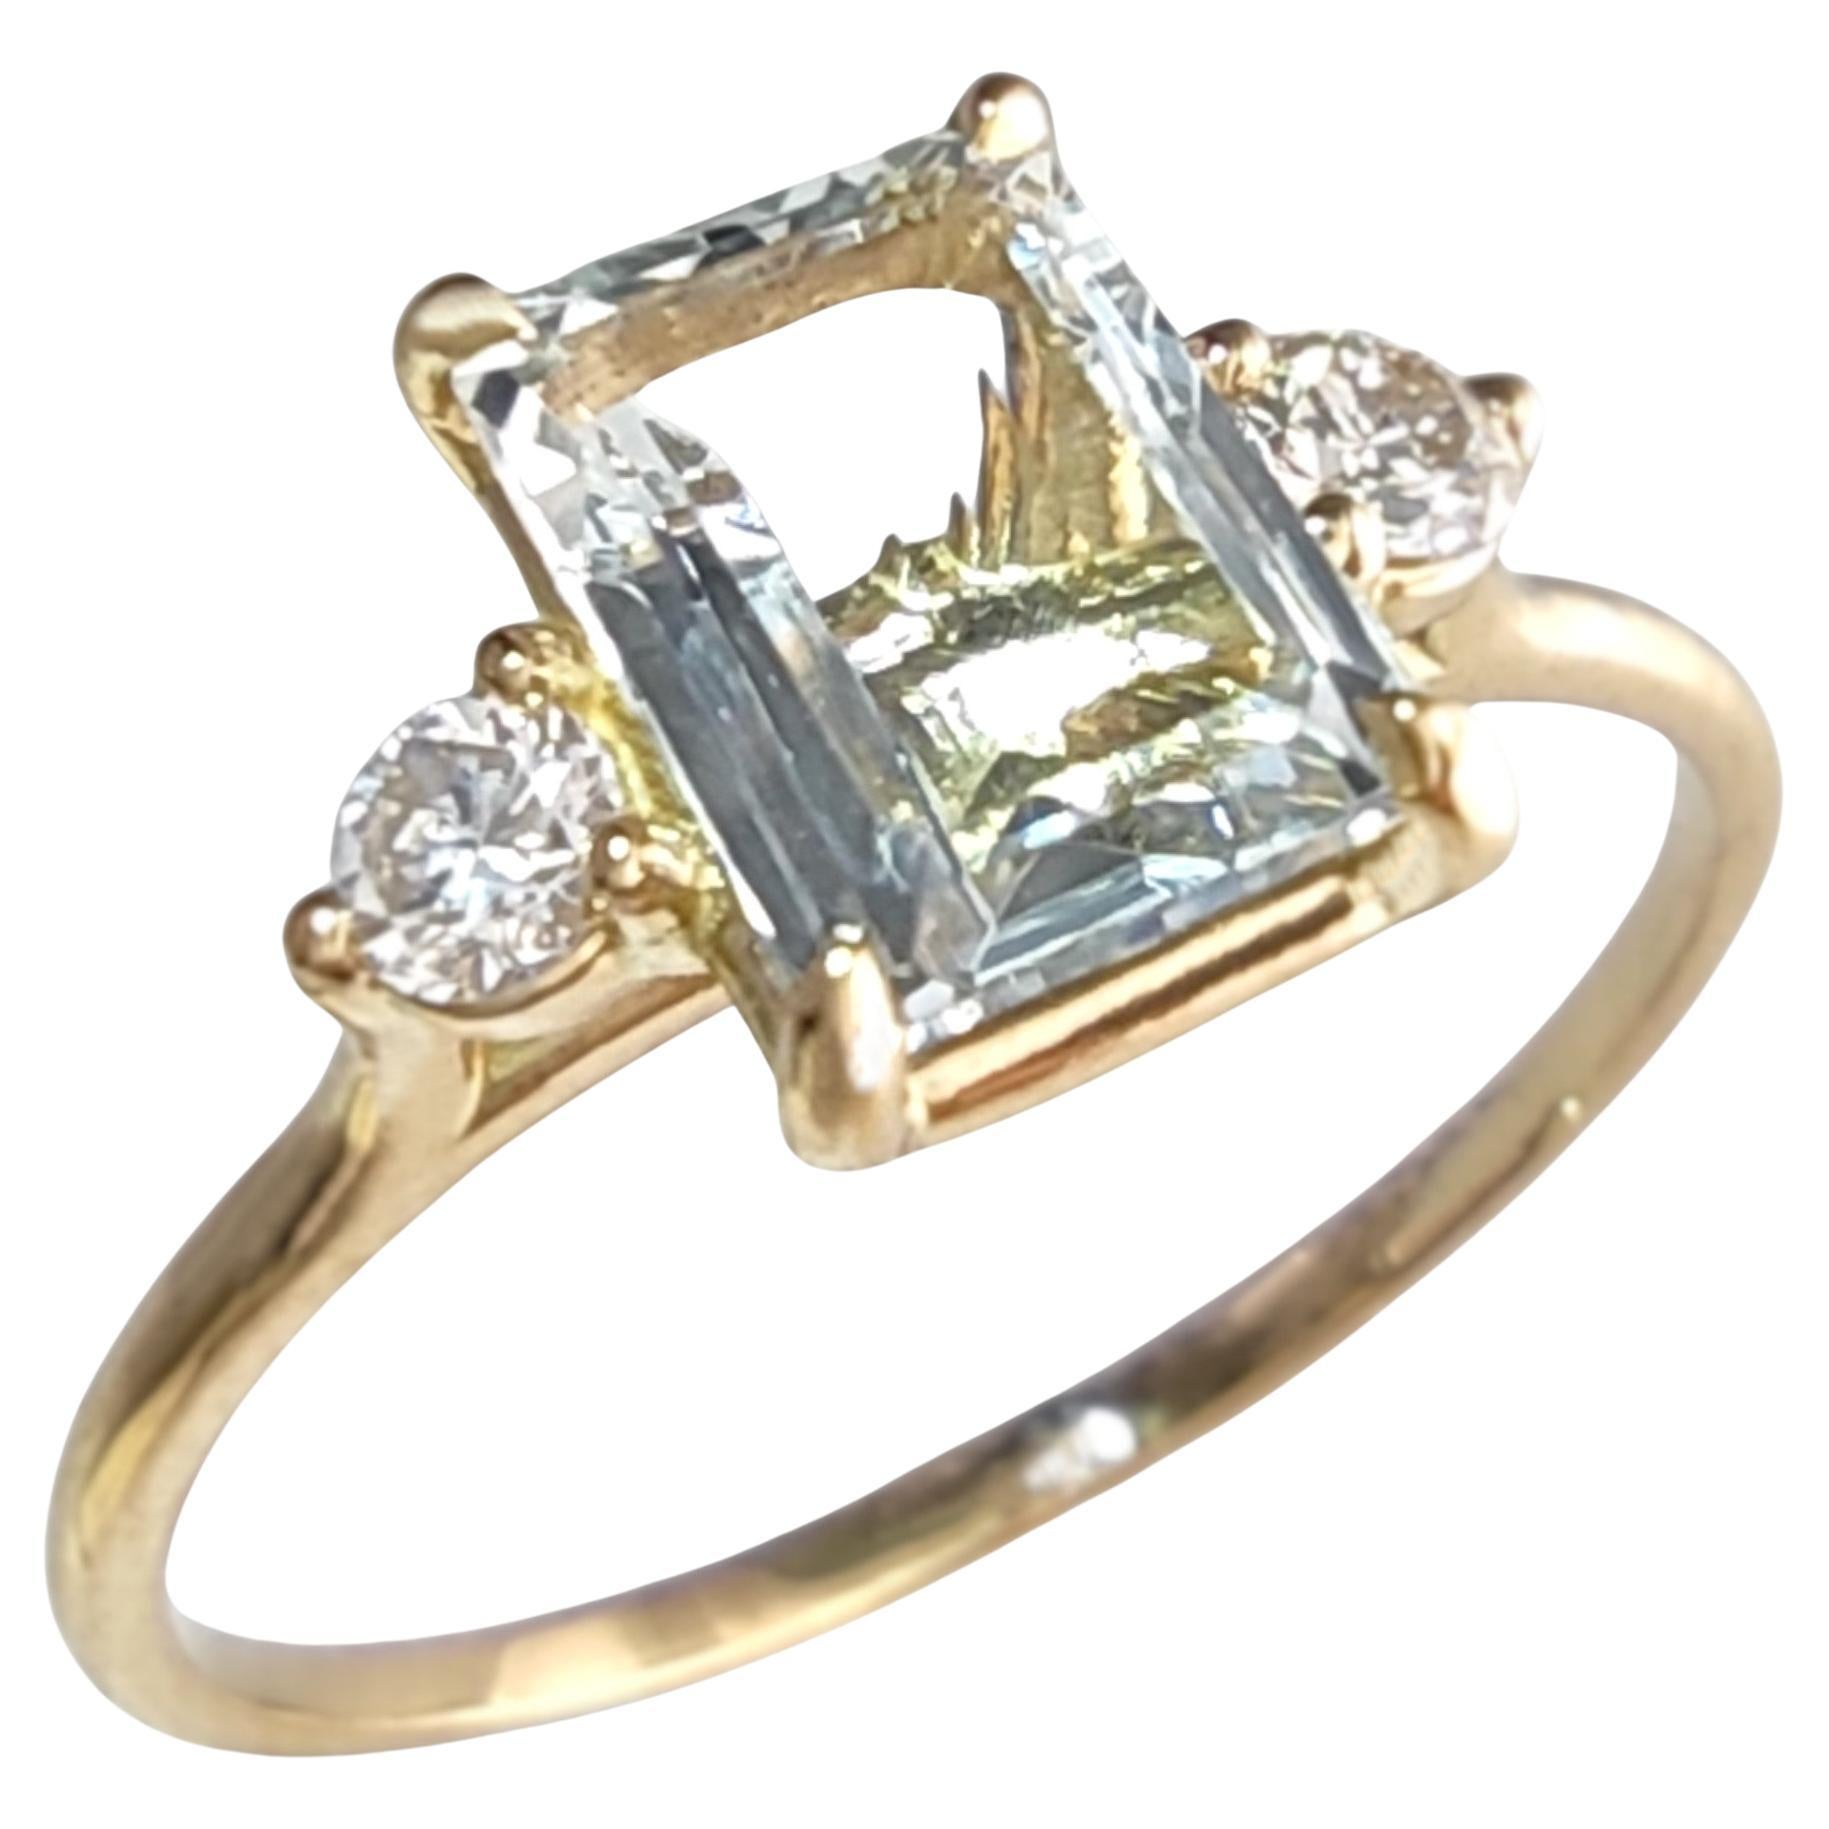 18K Yellow Gold Women's Ring with 0.88ct Aquamarine and 0.12ct Diamond Accents